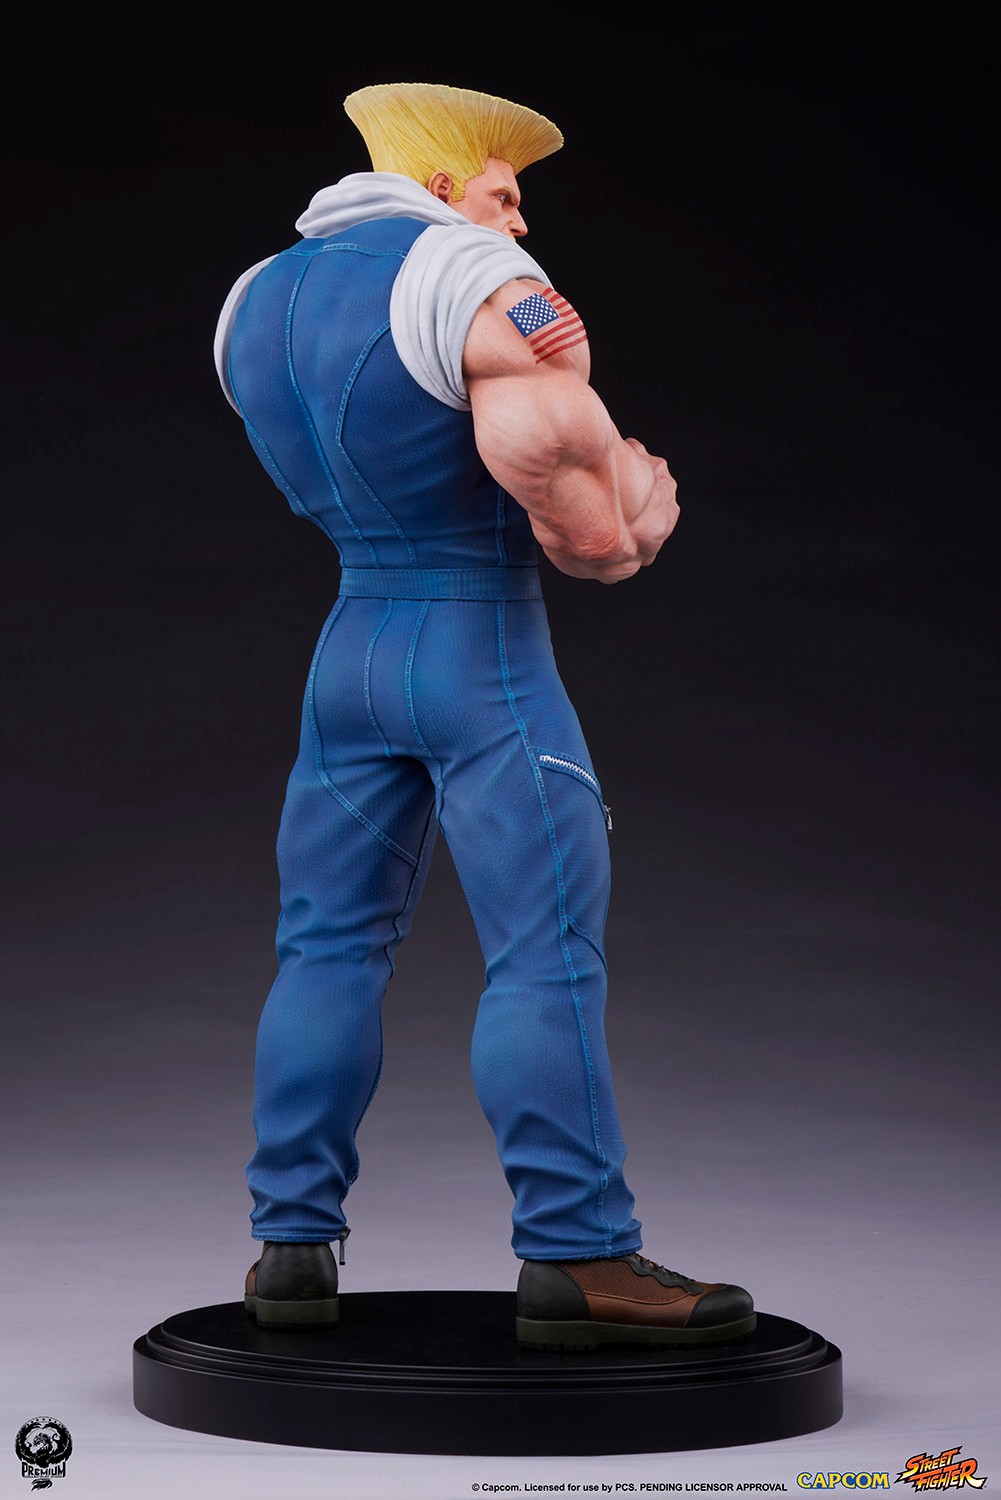 Guile Collector Edition (Prototype Shown) View 14